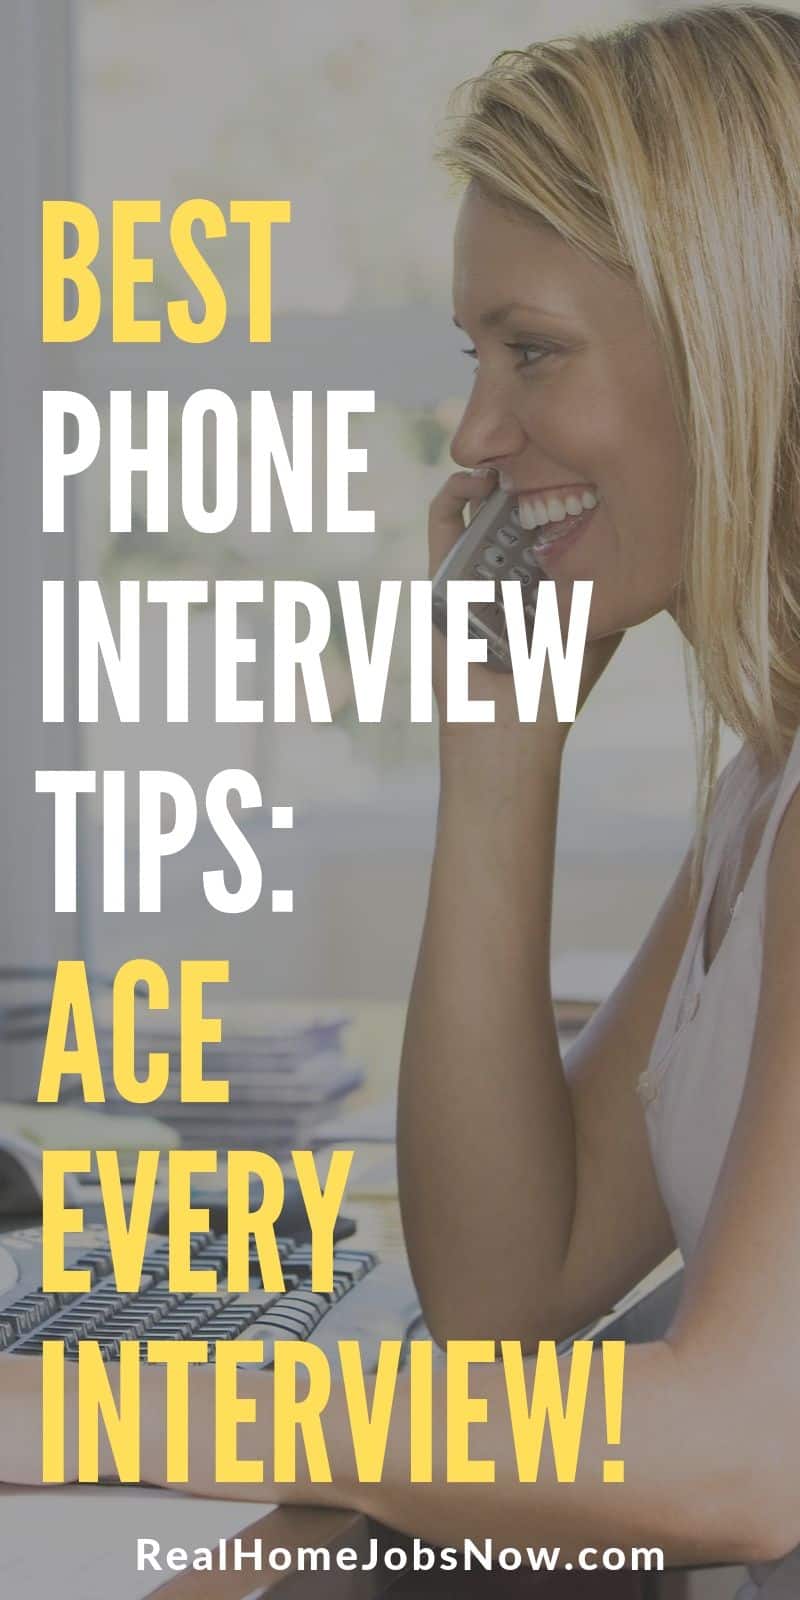 These phone interview tips are tried and true, and they work wonders for landing a legitimate online job! If you want to work from home, you absolutely need to be a rockstar at telephone interviews. This list will help you!